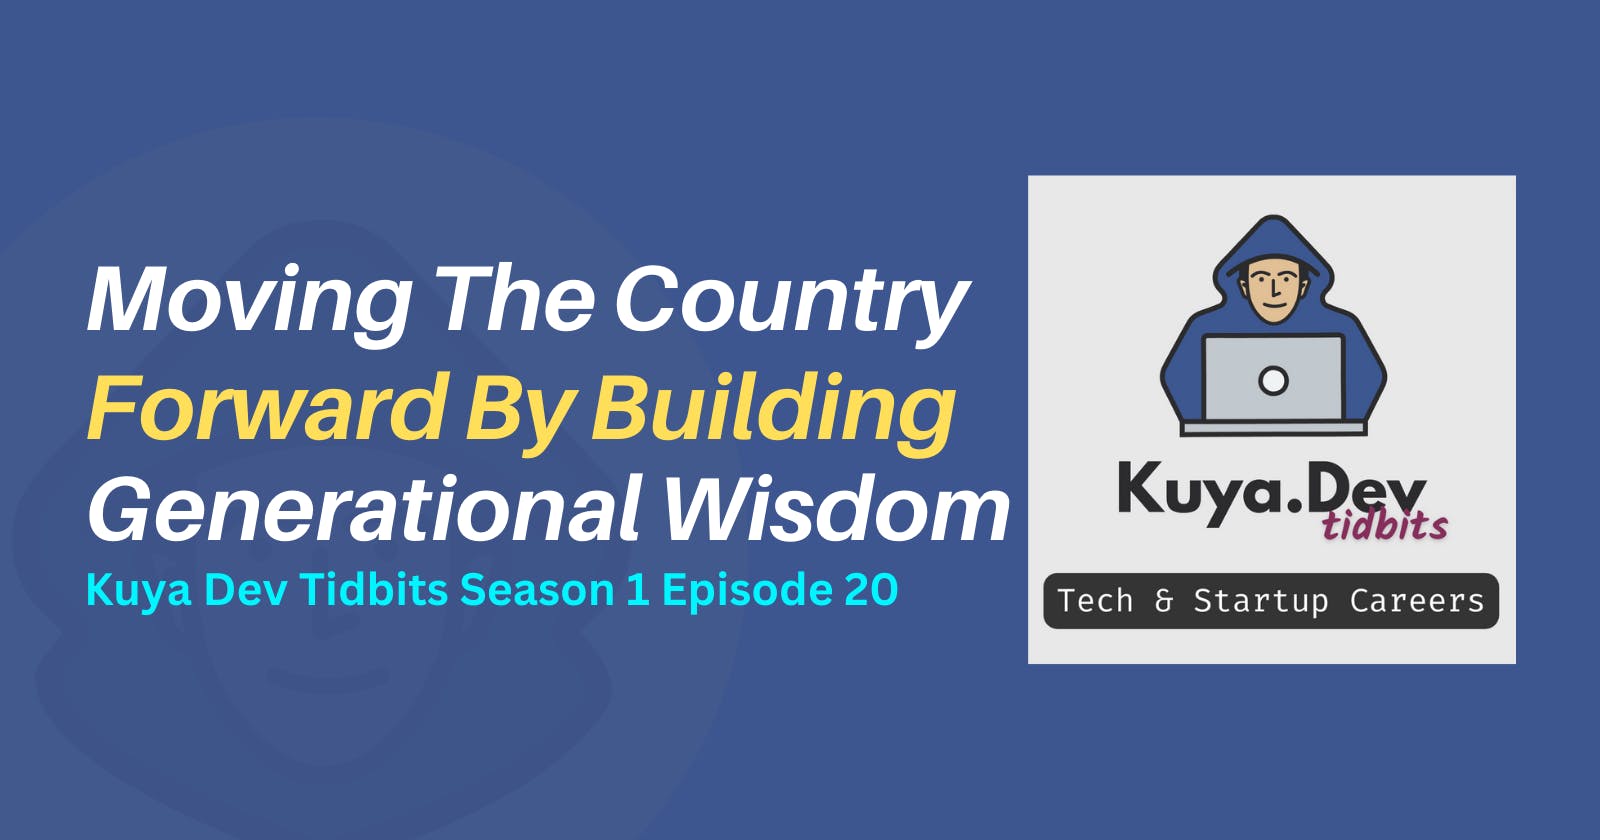 Moving the Country Forward by Building Generational Wisdom